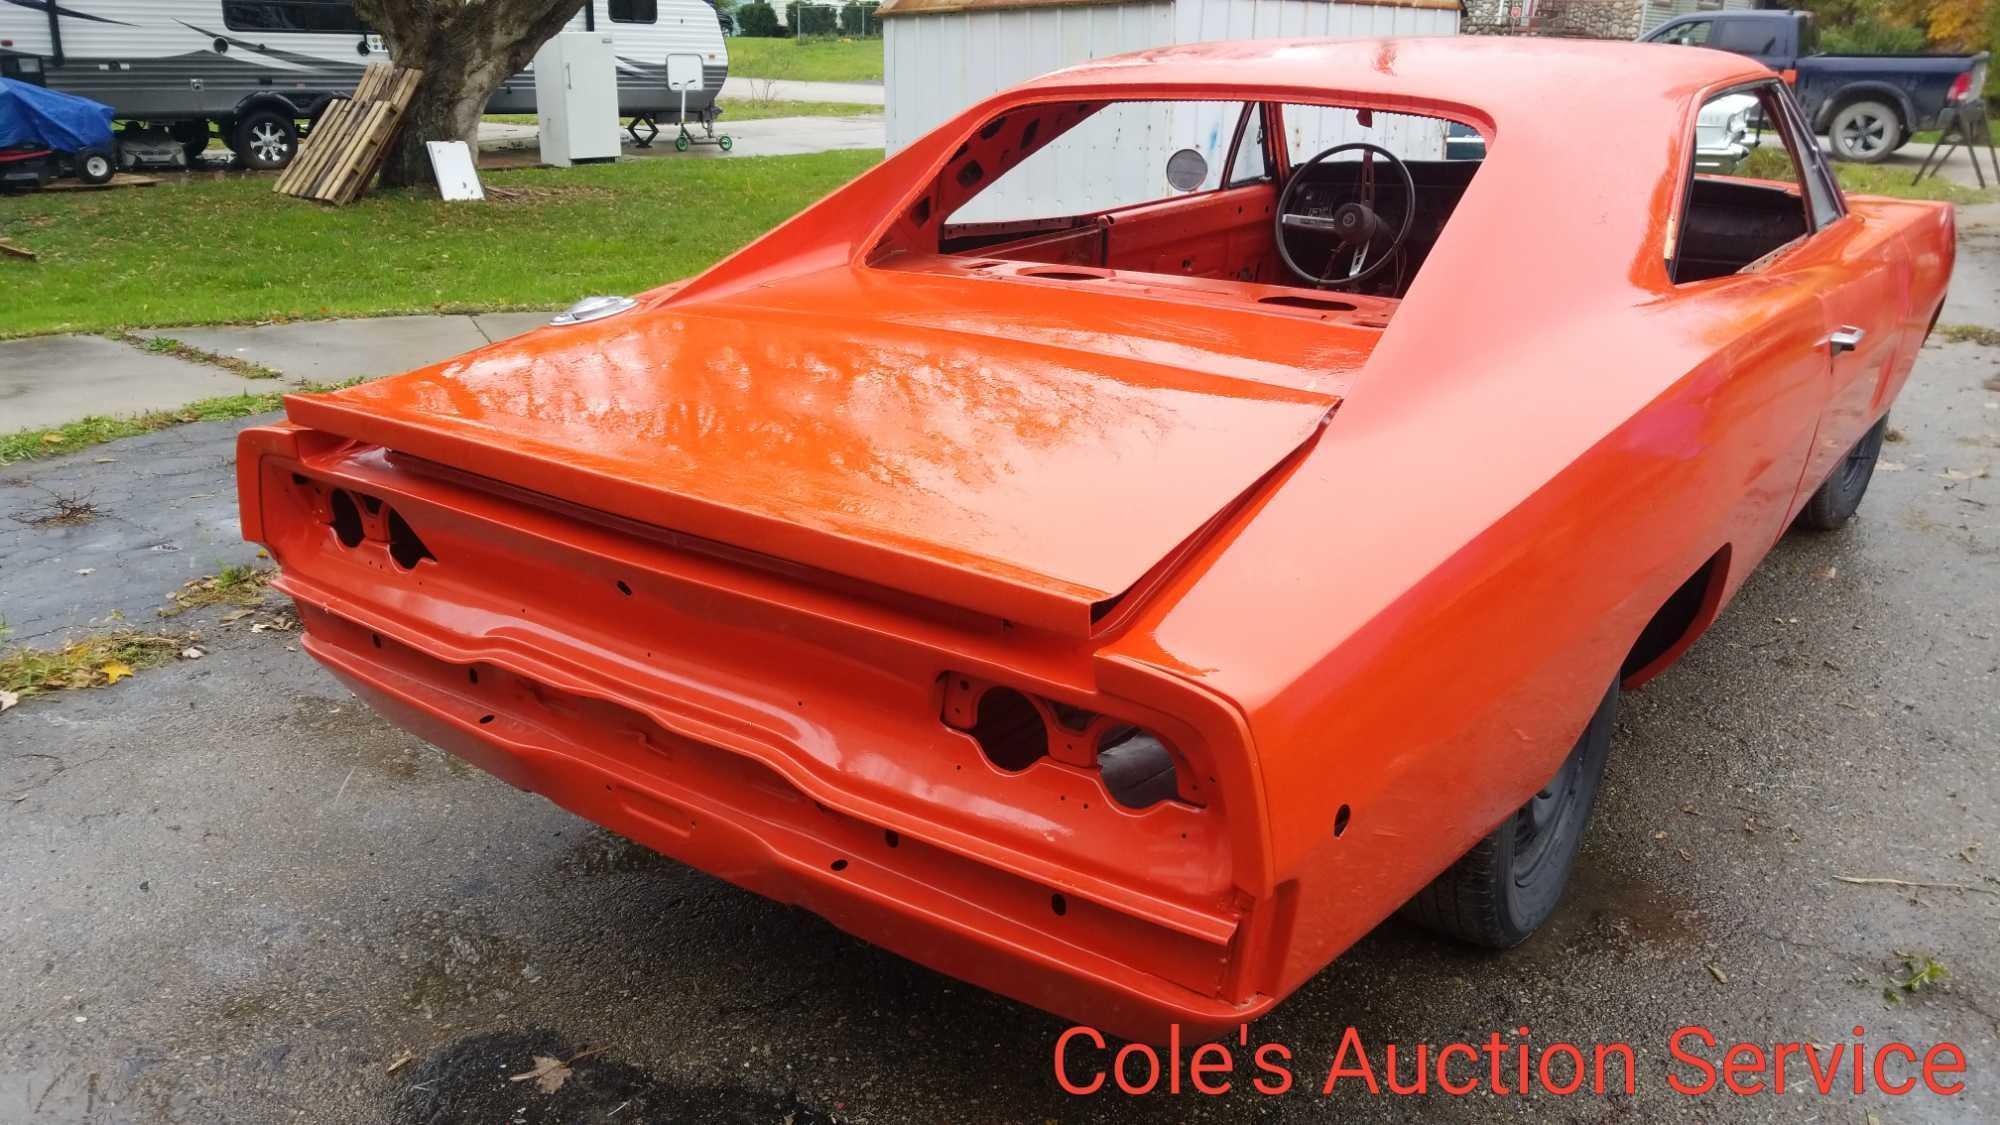 Rare 1968 Dodge Charger "Dukes of Hazard". Professional restoration has started and just needs to be